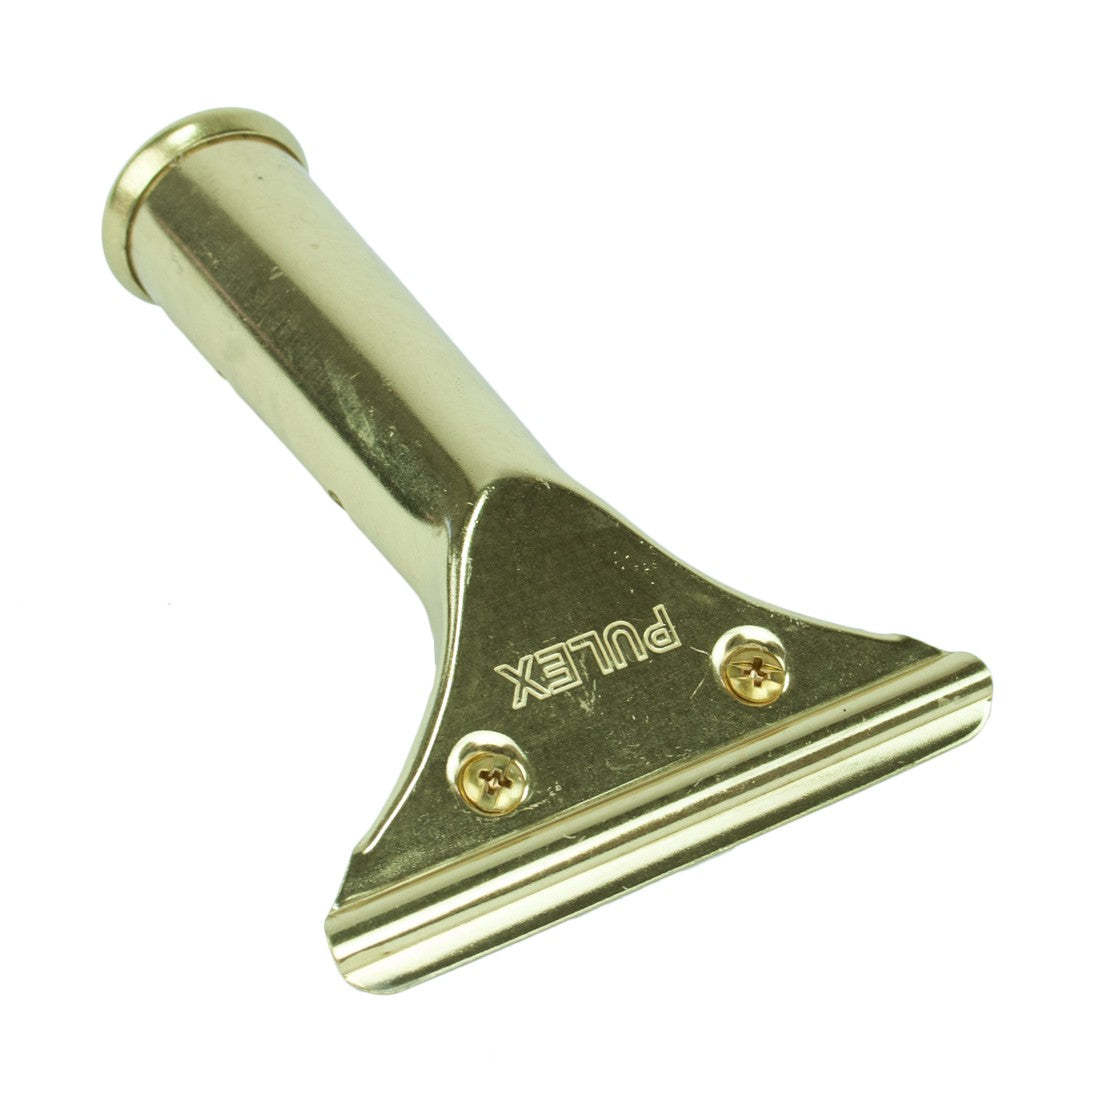 Pulex Traditional Brass Window Squeegee Handle - Oblique Top View